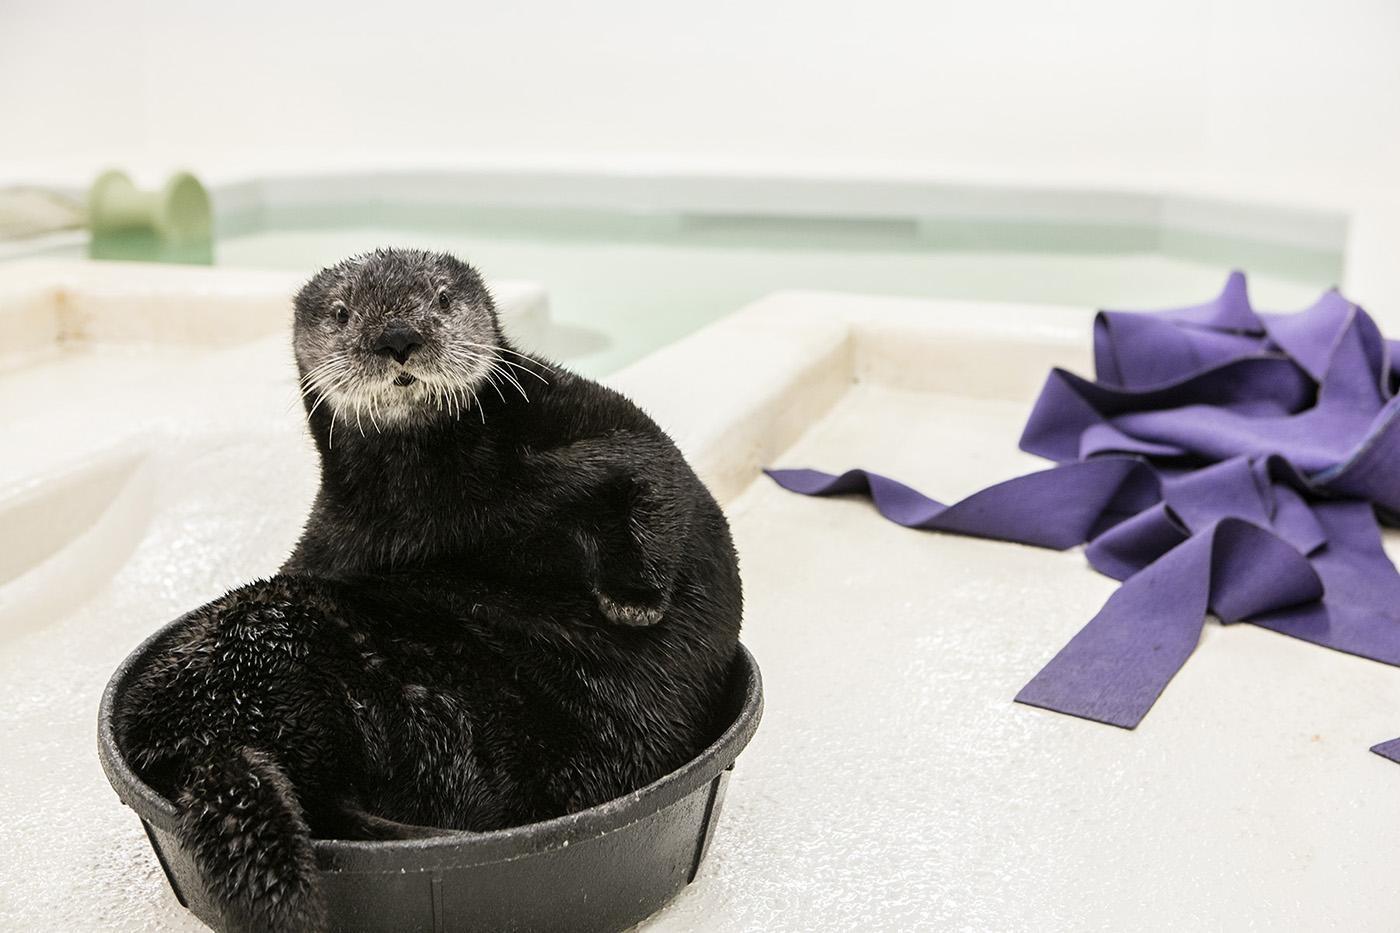 In 2014, Luna, one of the Shedd’s sea otters, was rescued off a California coast at just one week old. Wildlife officials believed she’d been separated by her mother and in “dire need” of food. (Courtesy Shedd Aquarium)